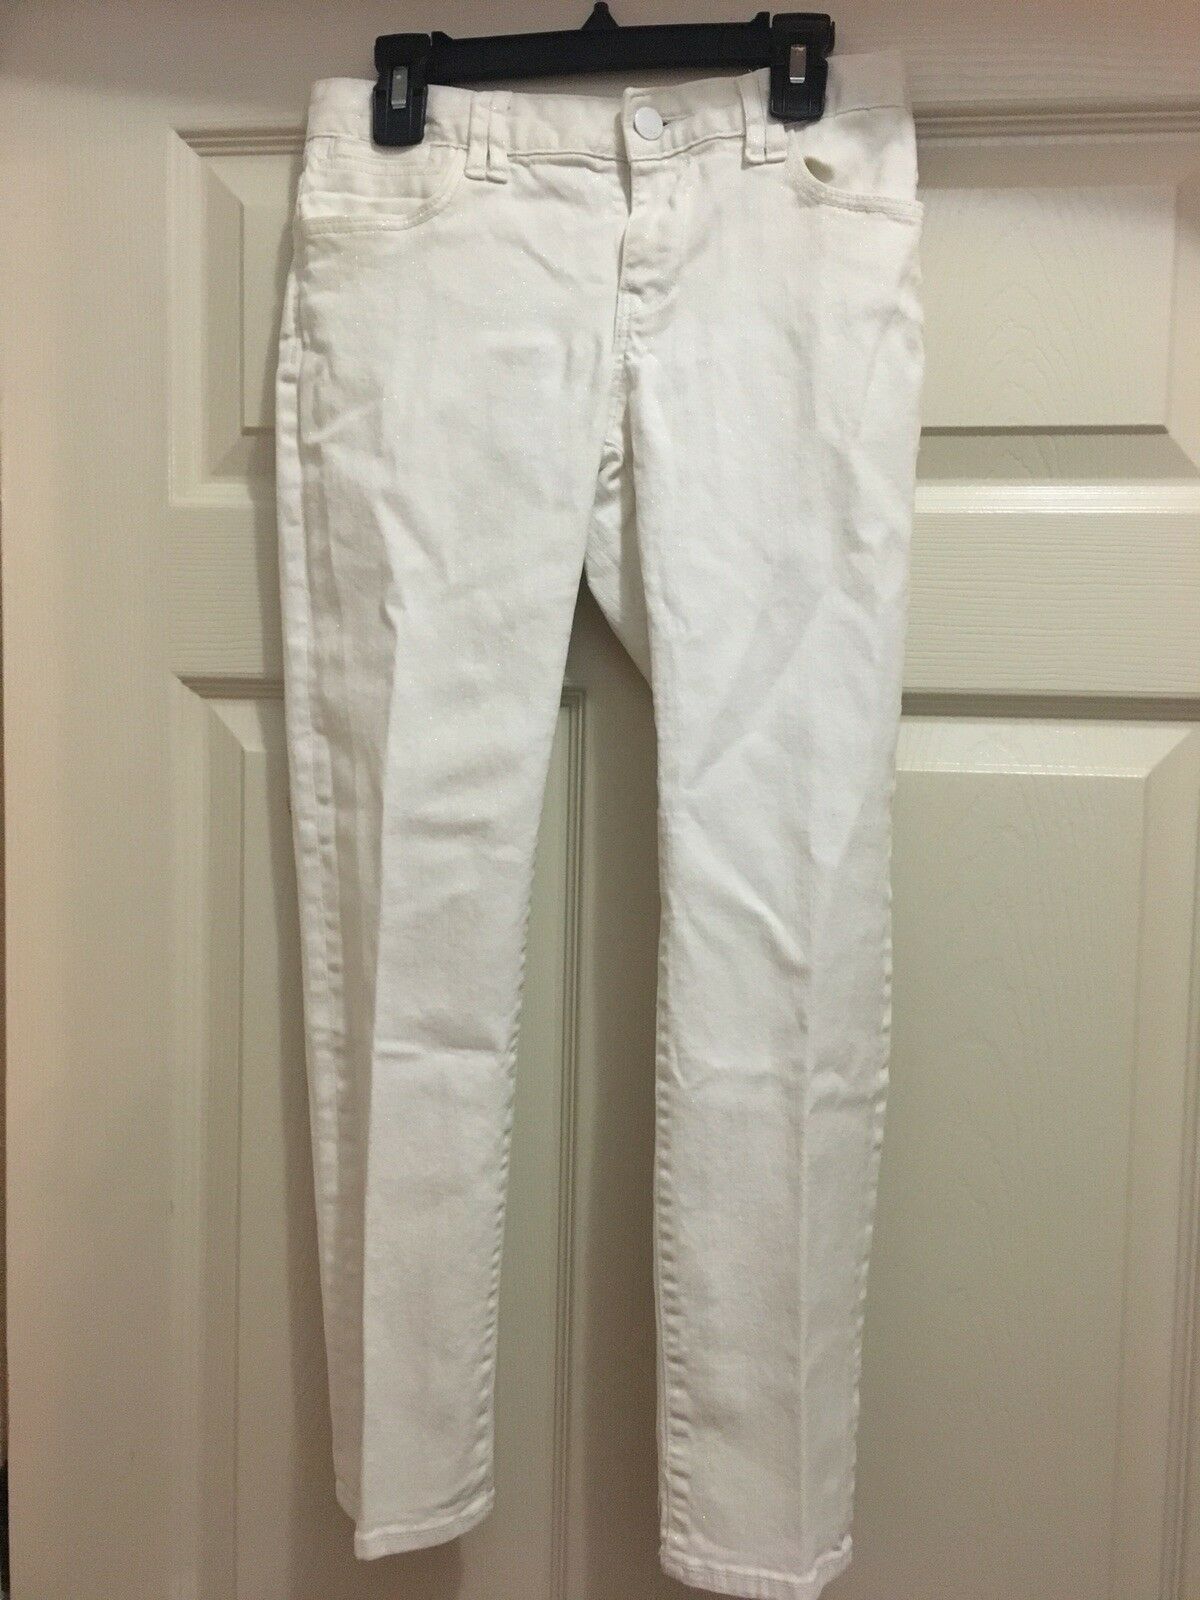 Gap Kids 1969 Super Skinny White With Sparkles Jeans Girls 12 Great Condition